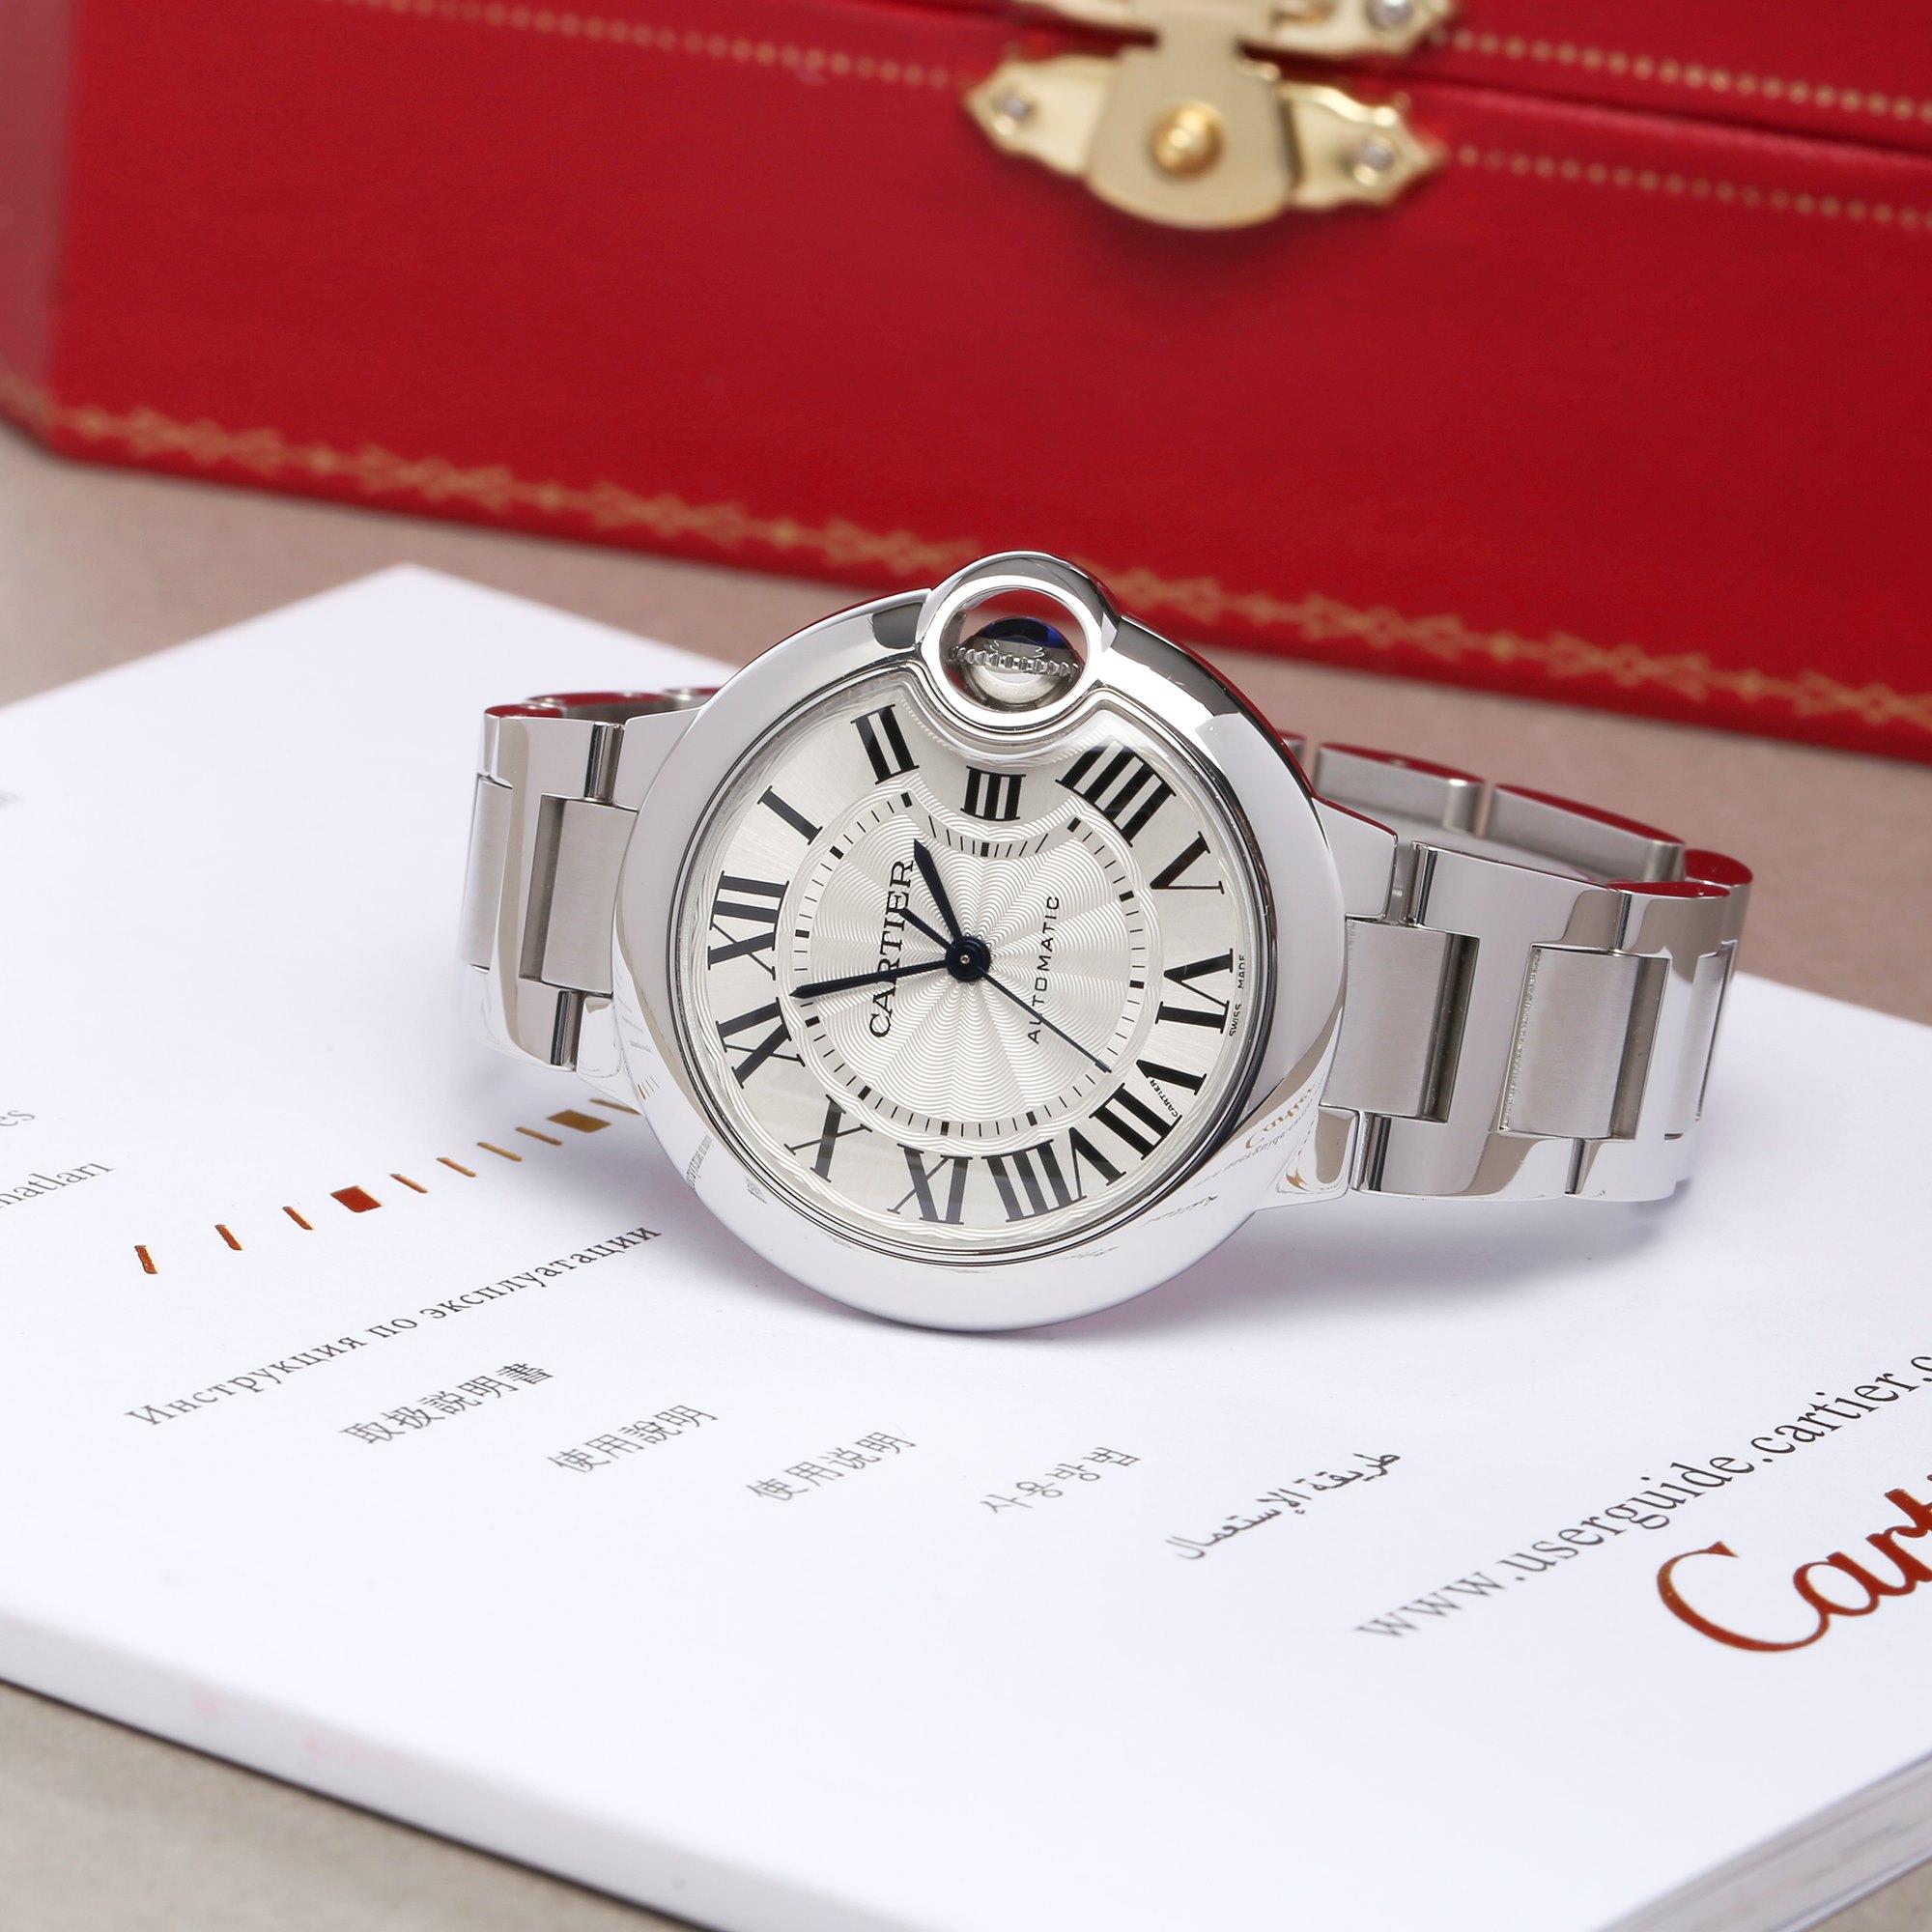 Cartier Ballon Bleu W6920071 or 3489 Ladies Stainless Steel Automatic Watch 2